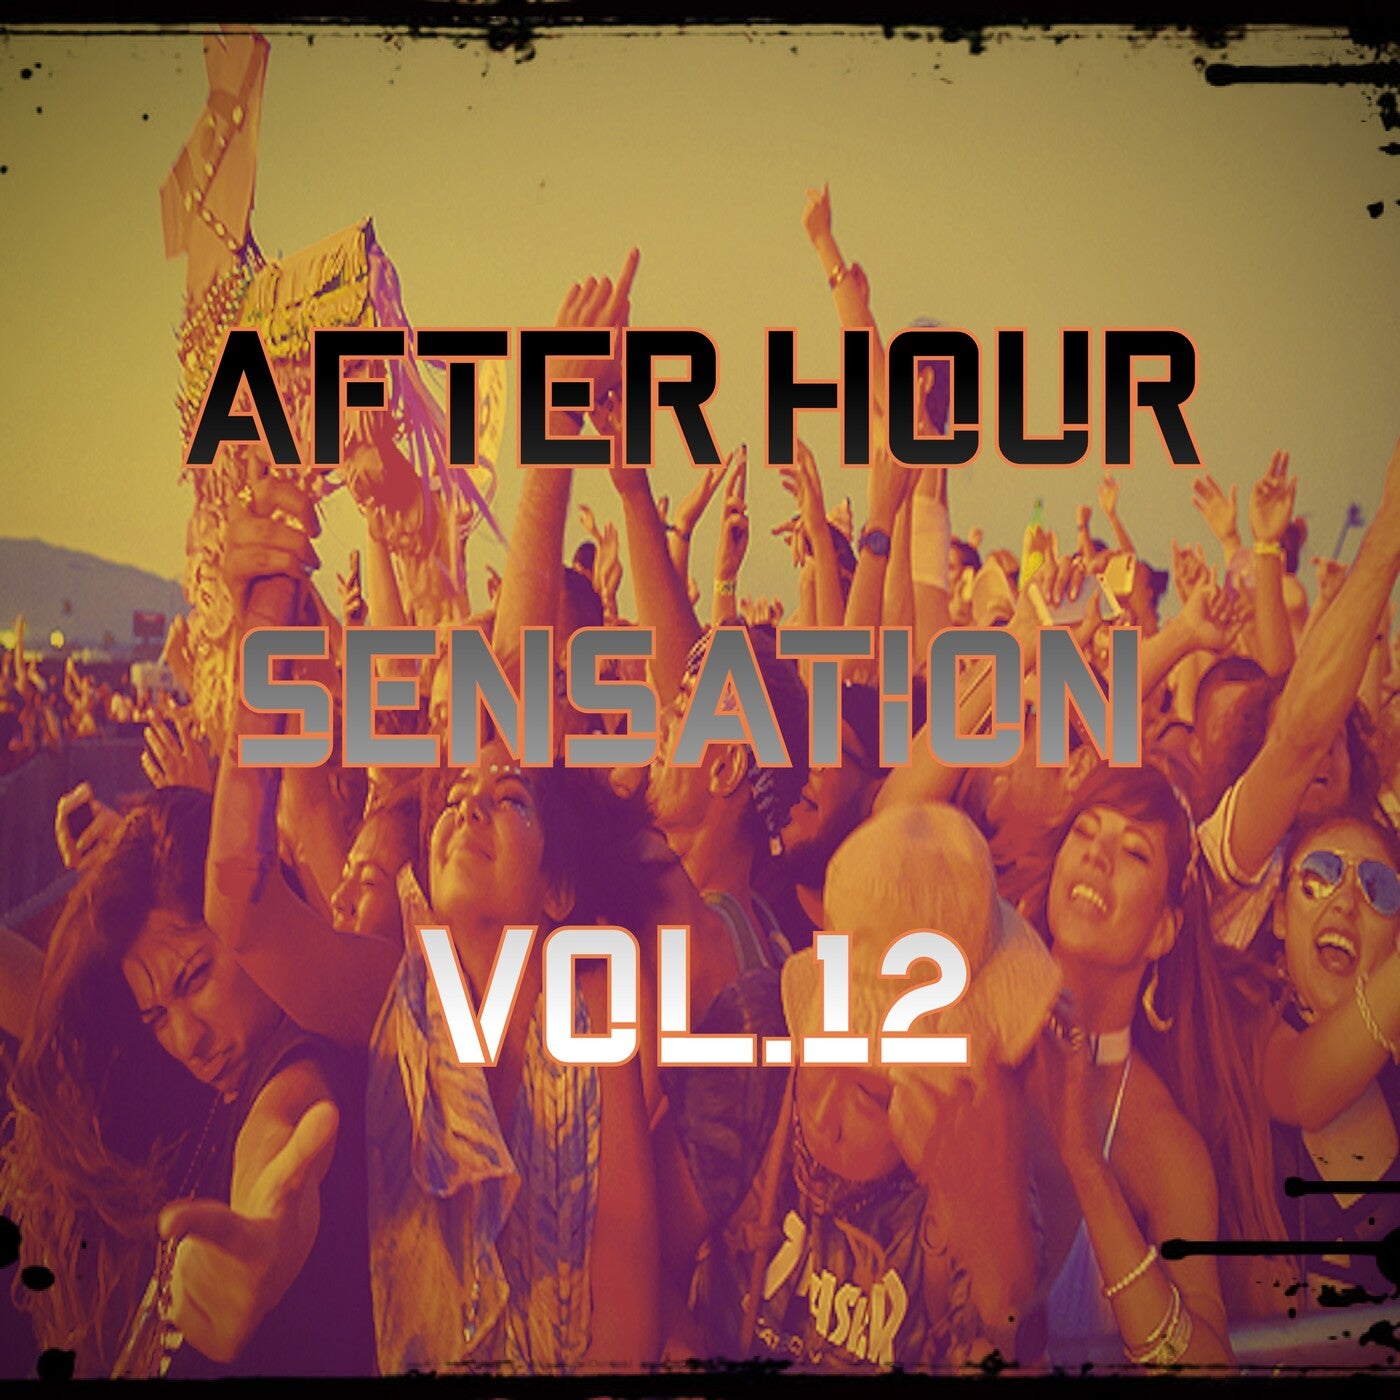 After Hour Sensation, Vol.12 (BEST SELECTION OF CLUBBING HOUSE AND TECH HOUSE TRACKS)